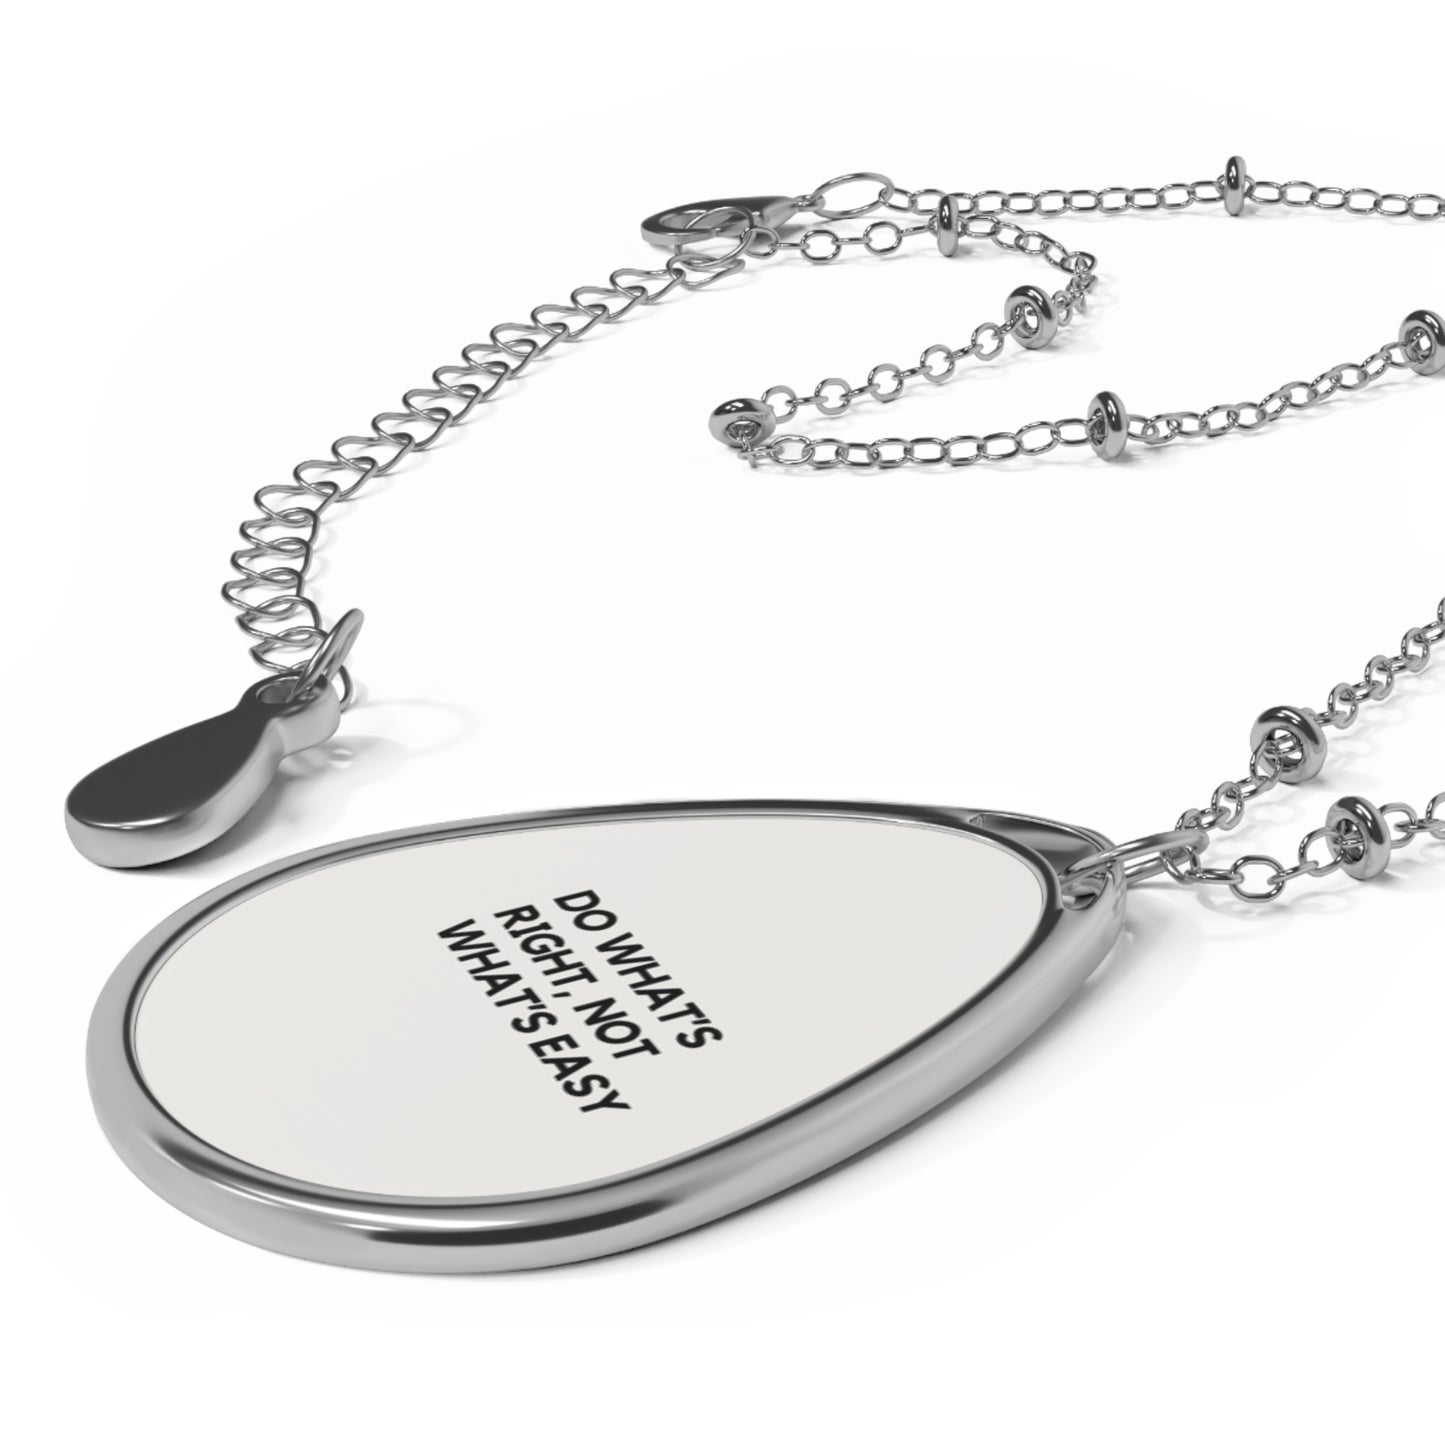 Do what is right - Oval Necklace